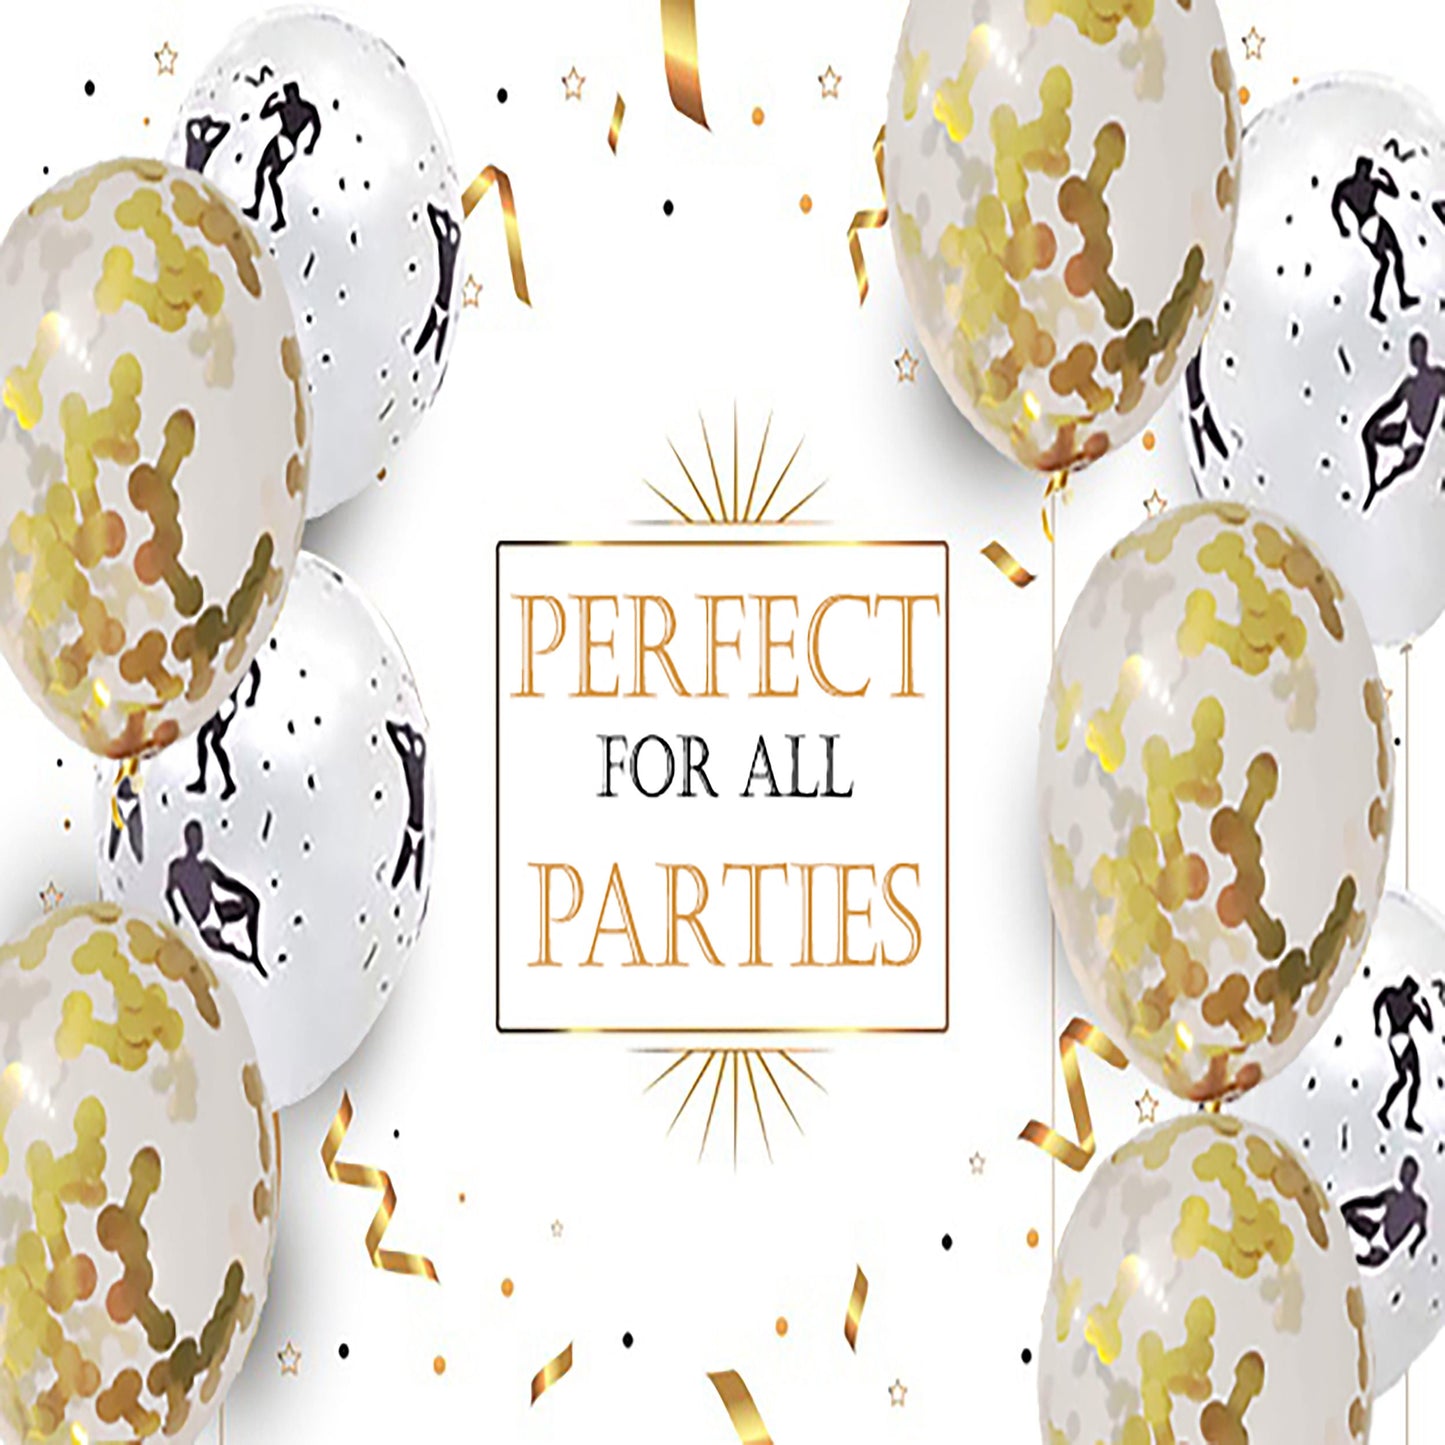 36 Bachelorette Party Decorations Naughty Balloons | Bridal Shower Supplies (White, Gold)